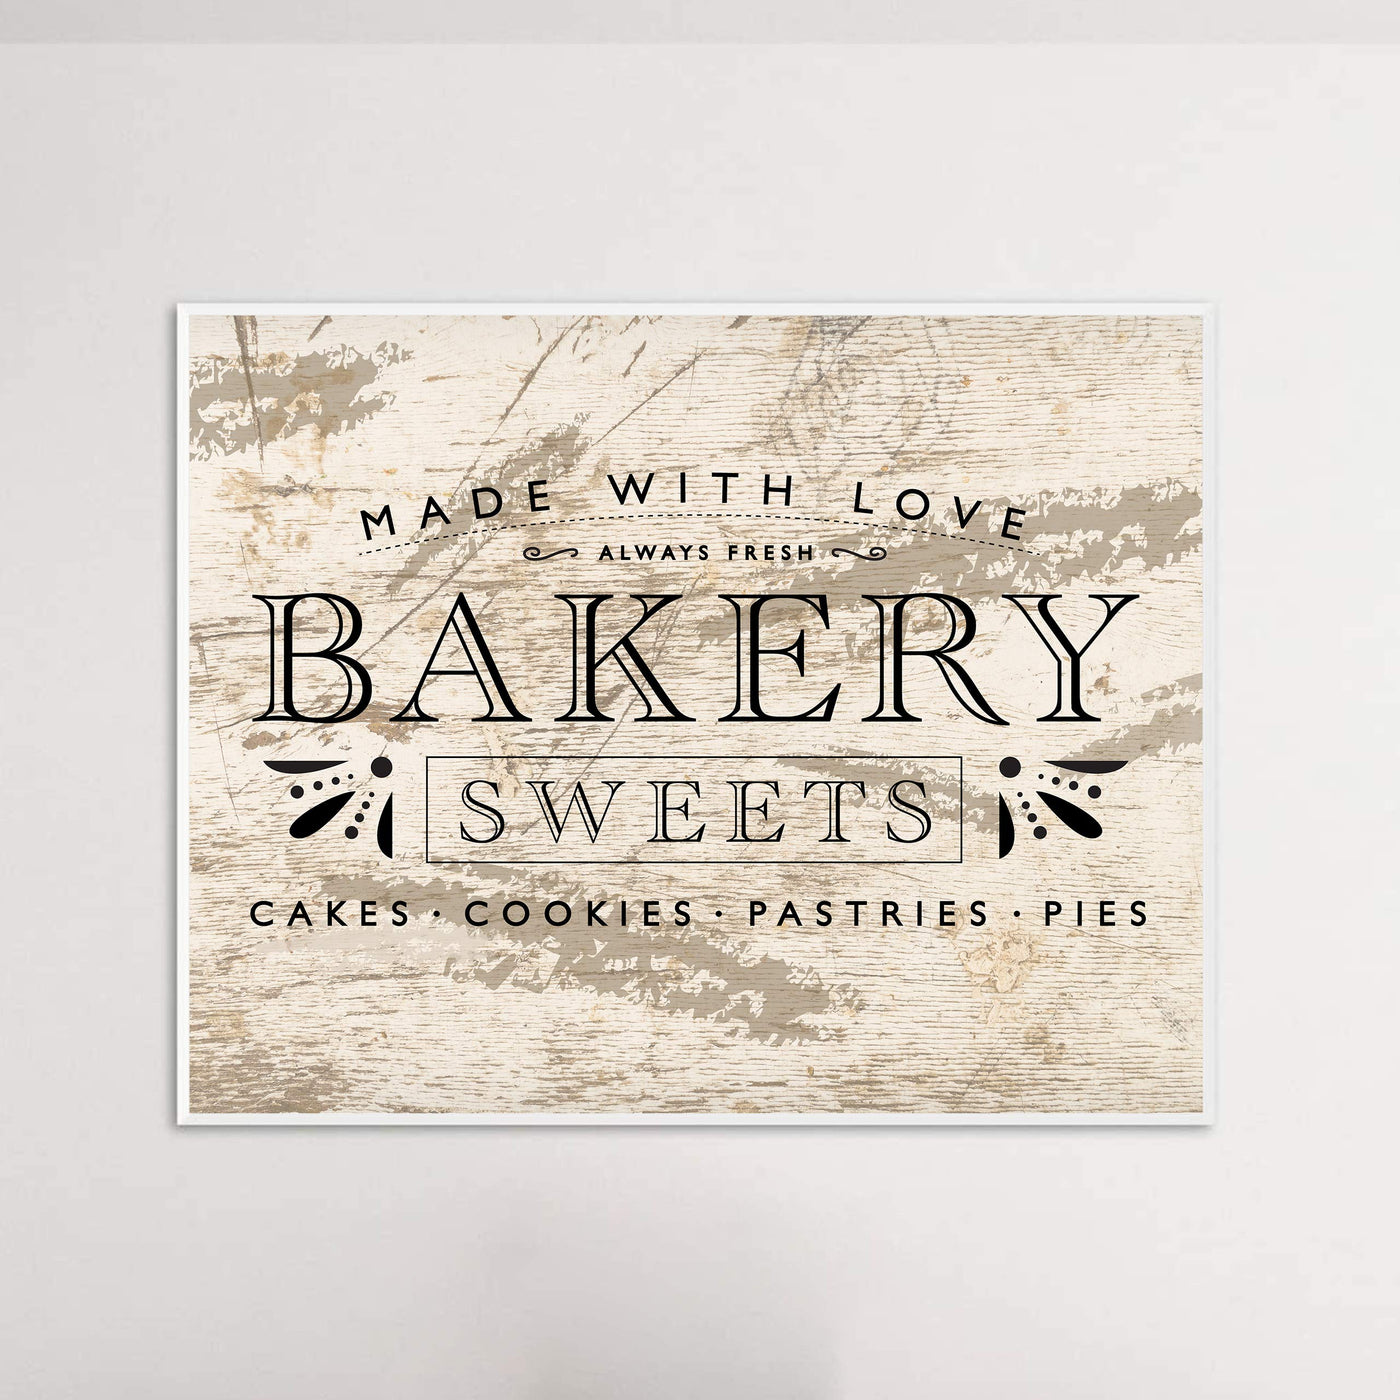 Bakery-Made With Love-Always Fresh -Vintage Wall Art Sign -14 x 11" Replica Distressed Wood Poster Print-Ready to Frame. Country Rustic Home-Kitchen-Pantry-Farmhouse Decor. Printed on Paper.